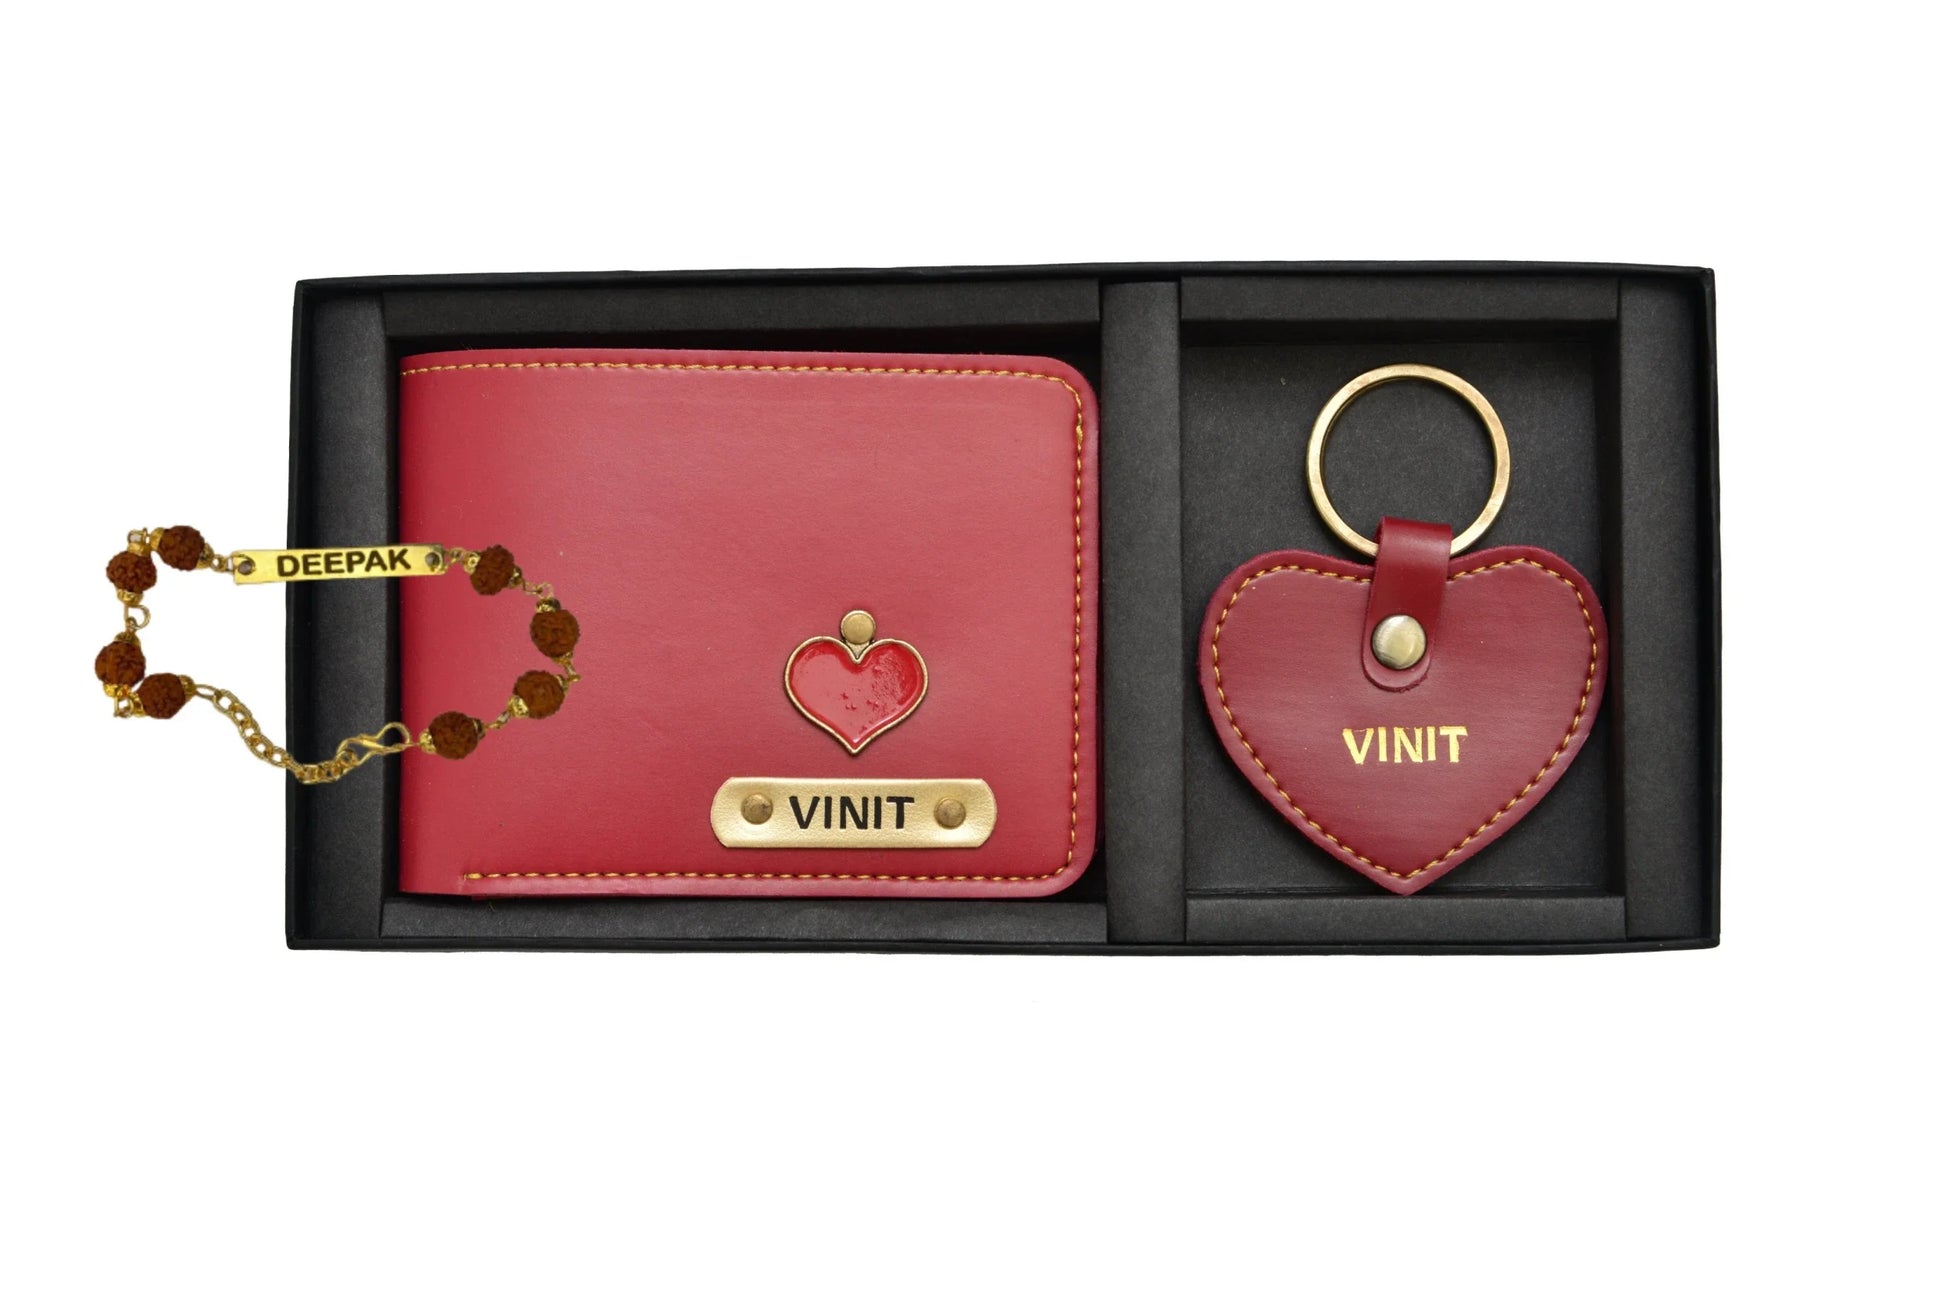 Brother's wallet with Heart Key chian & Free Rakhi - Tan - Your Gift Studio